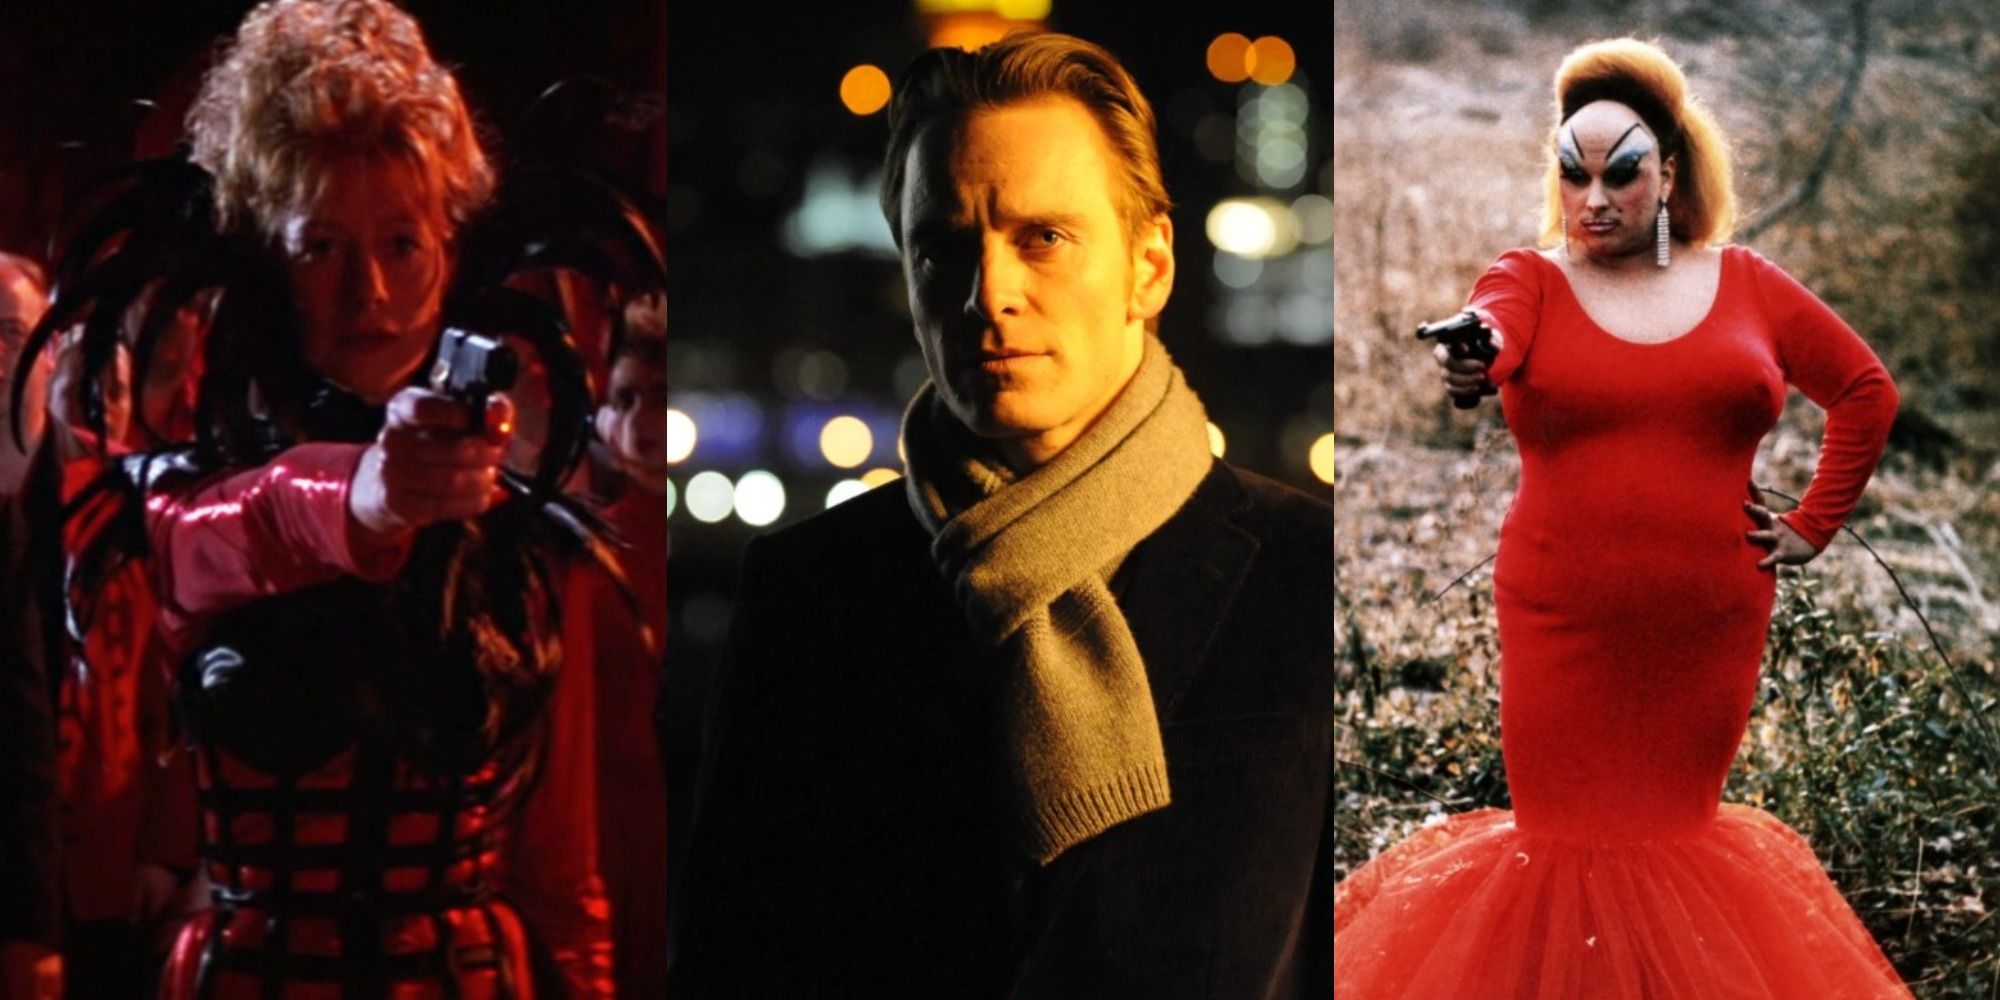 A collage of Michael Fassbender in Shame flanked by Helen Mirren in The Cook, The Thief, His Wife &#038; Her Lover and Divine in Pink Flamingos both pointing guns toward him